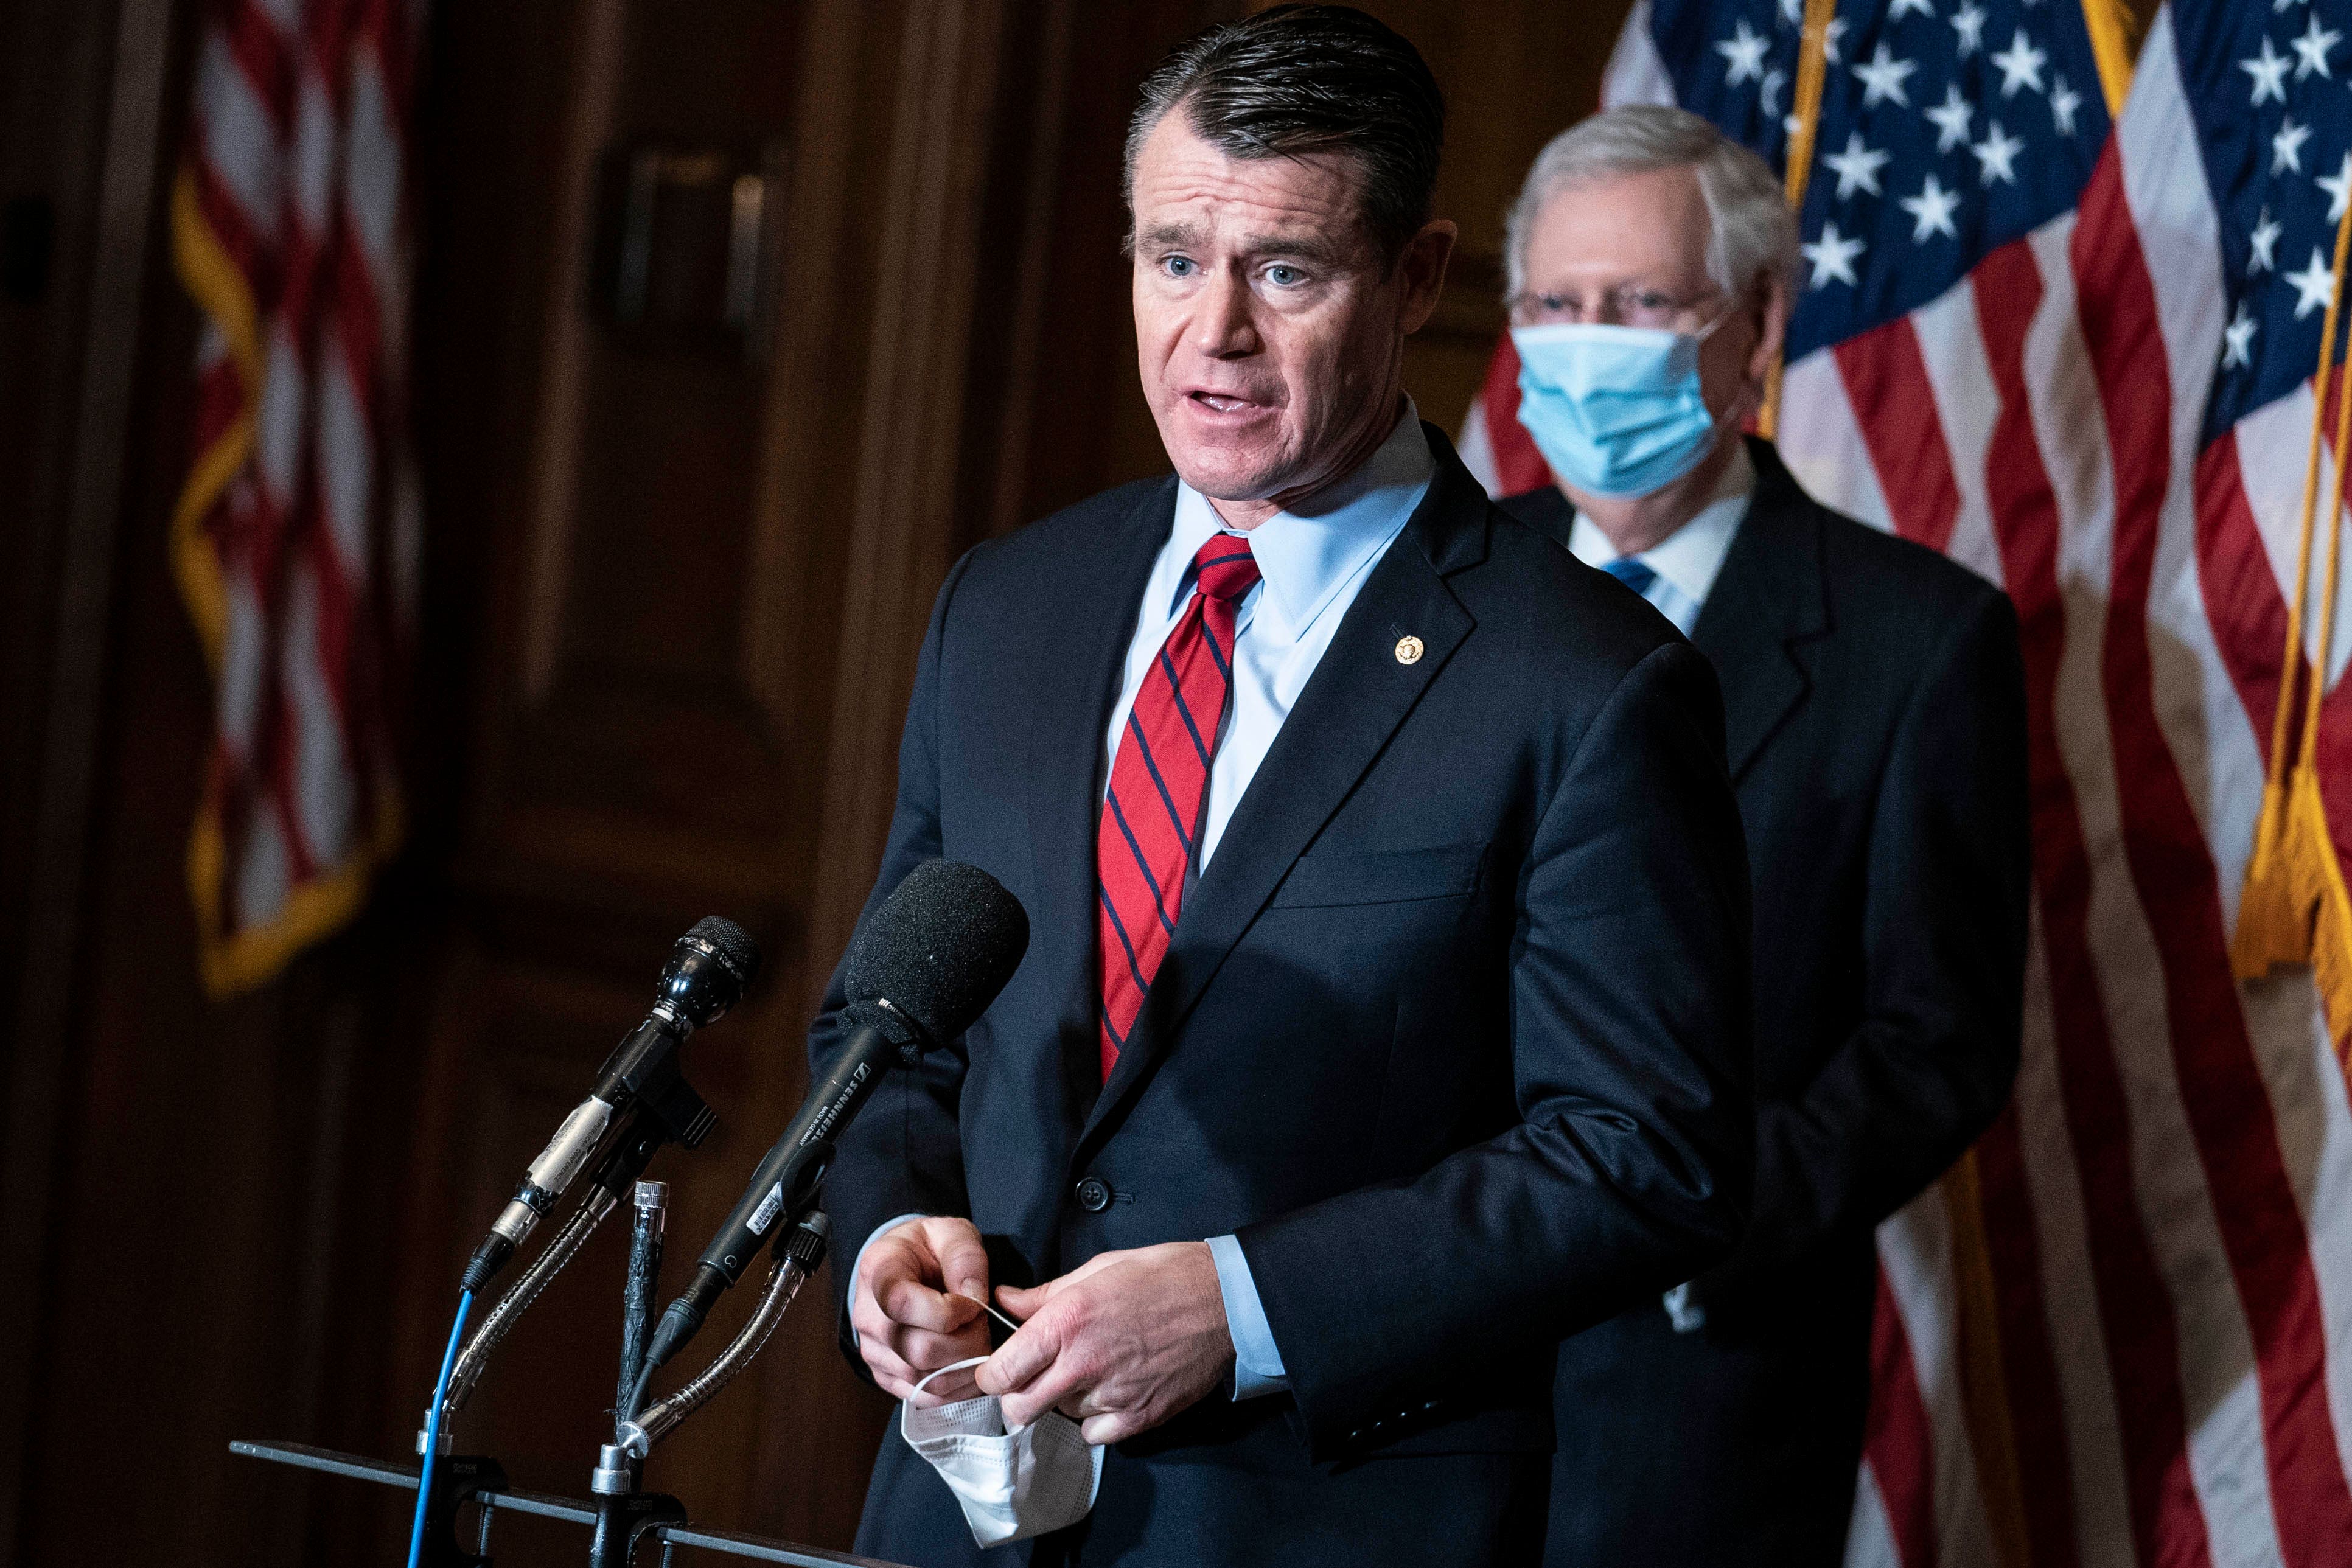 GOP Sen. Todd Young says Xi Jinping is 'scared' of his bill because it would invest in U.S. technologies